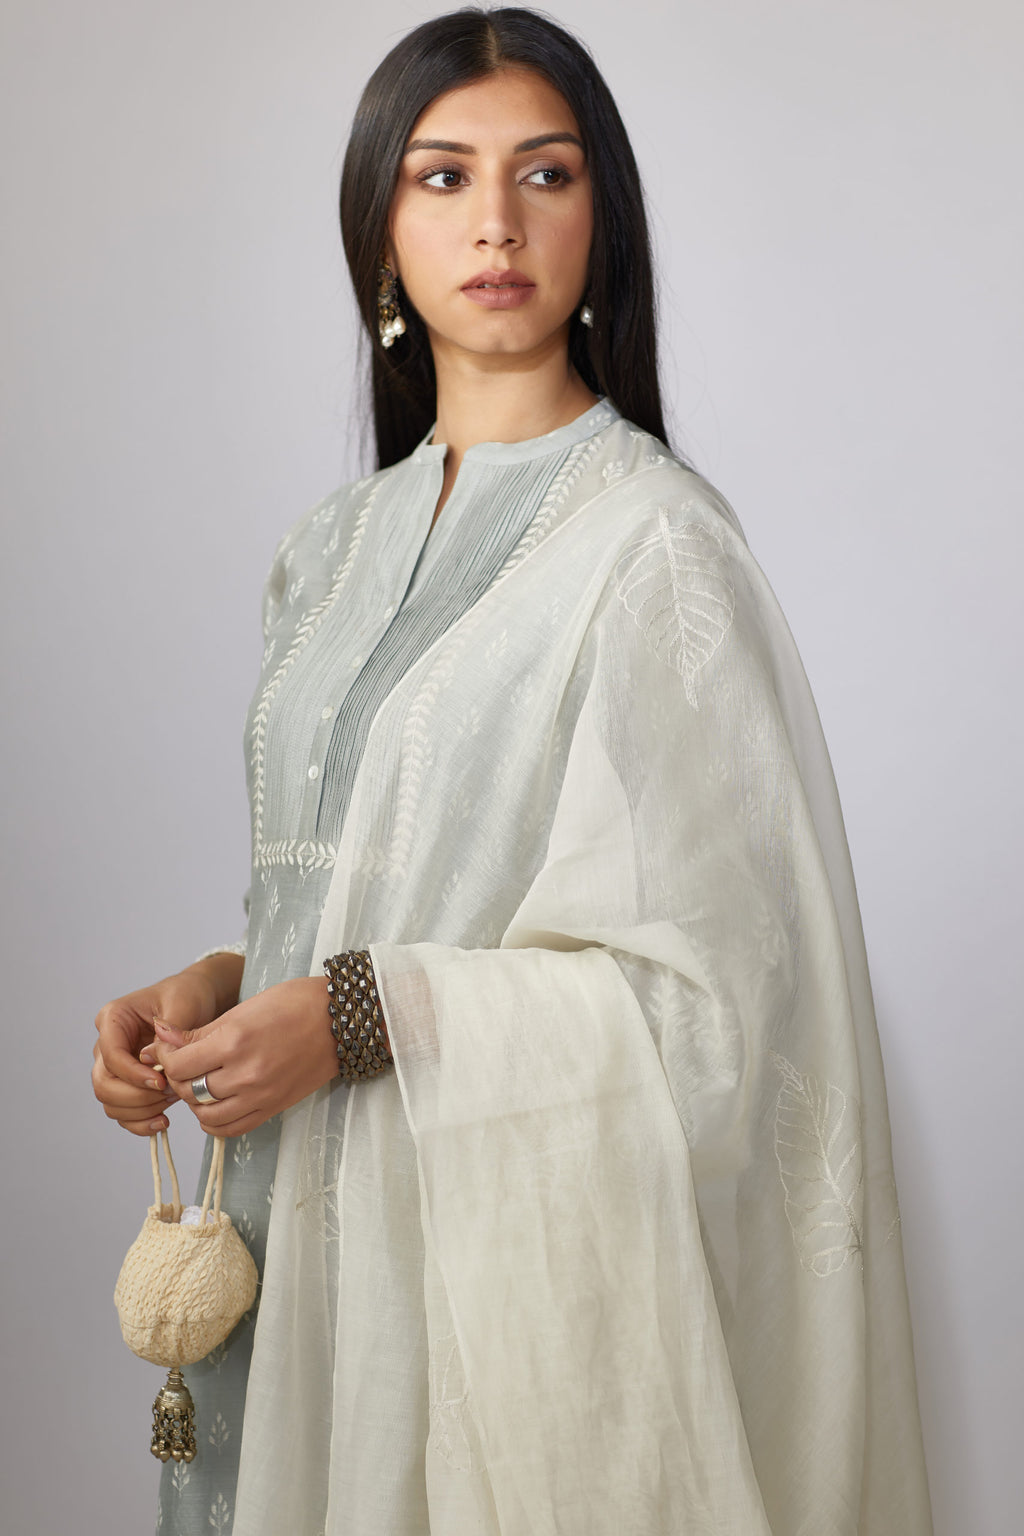 Cotton Chanderi dupatta with overall Leaf motif ari embroidery